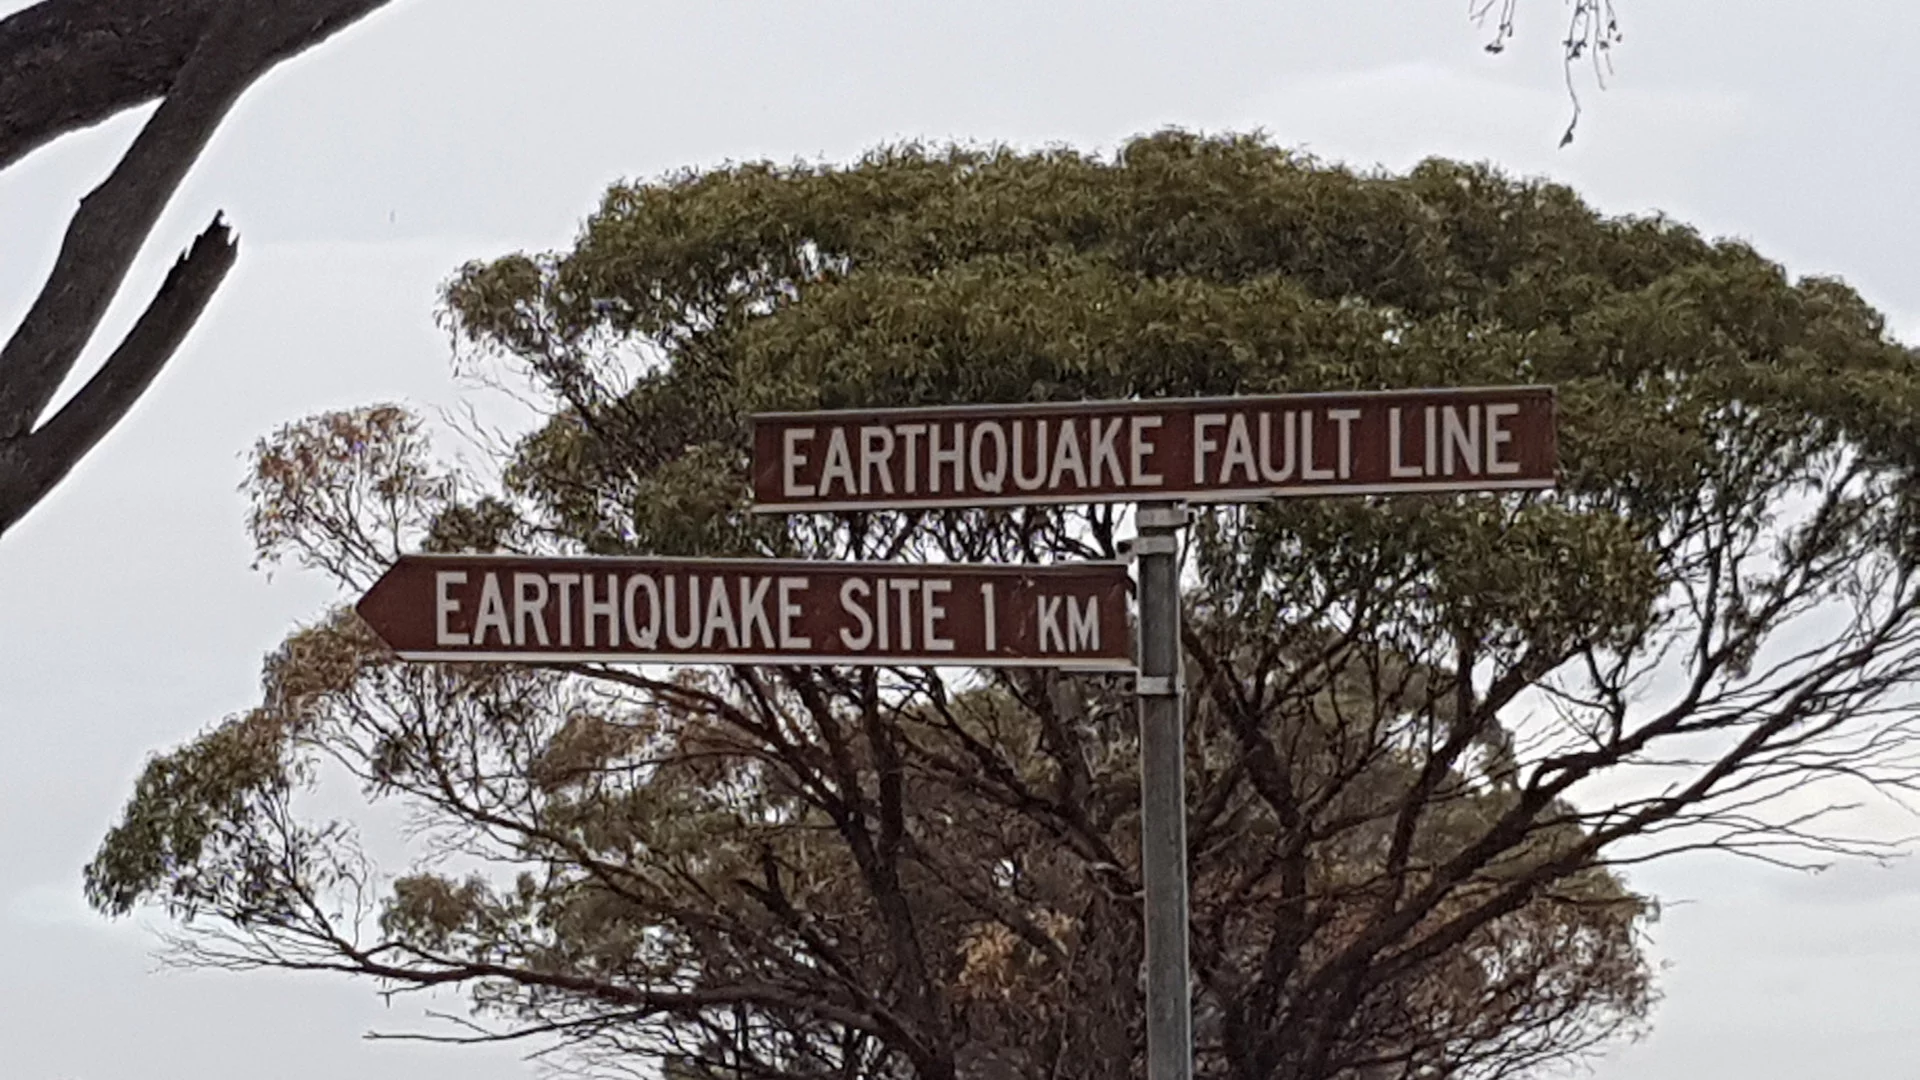 Brown sign of the Earthquake Fault Line taken at the site of where the fault line exists, also showing a brown sign to an Earthquake Site 1km away